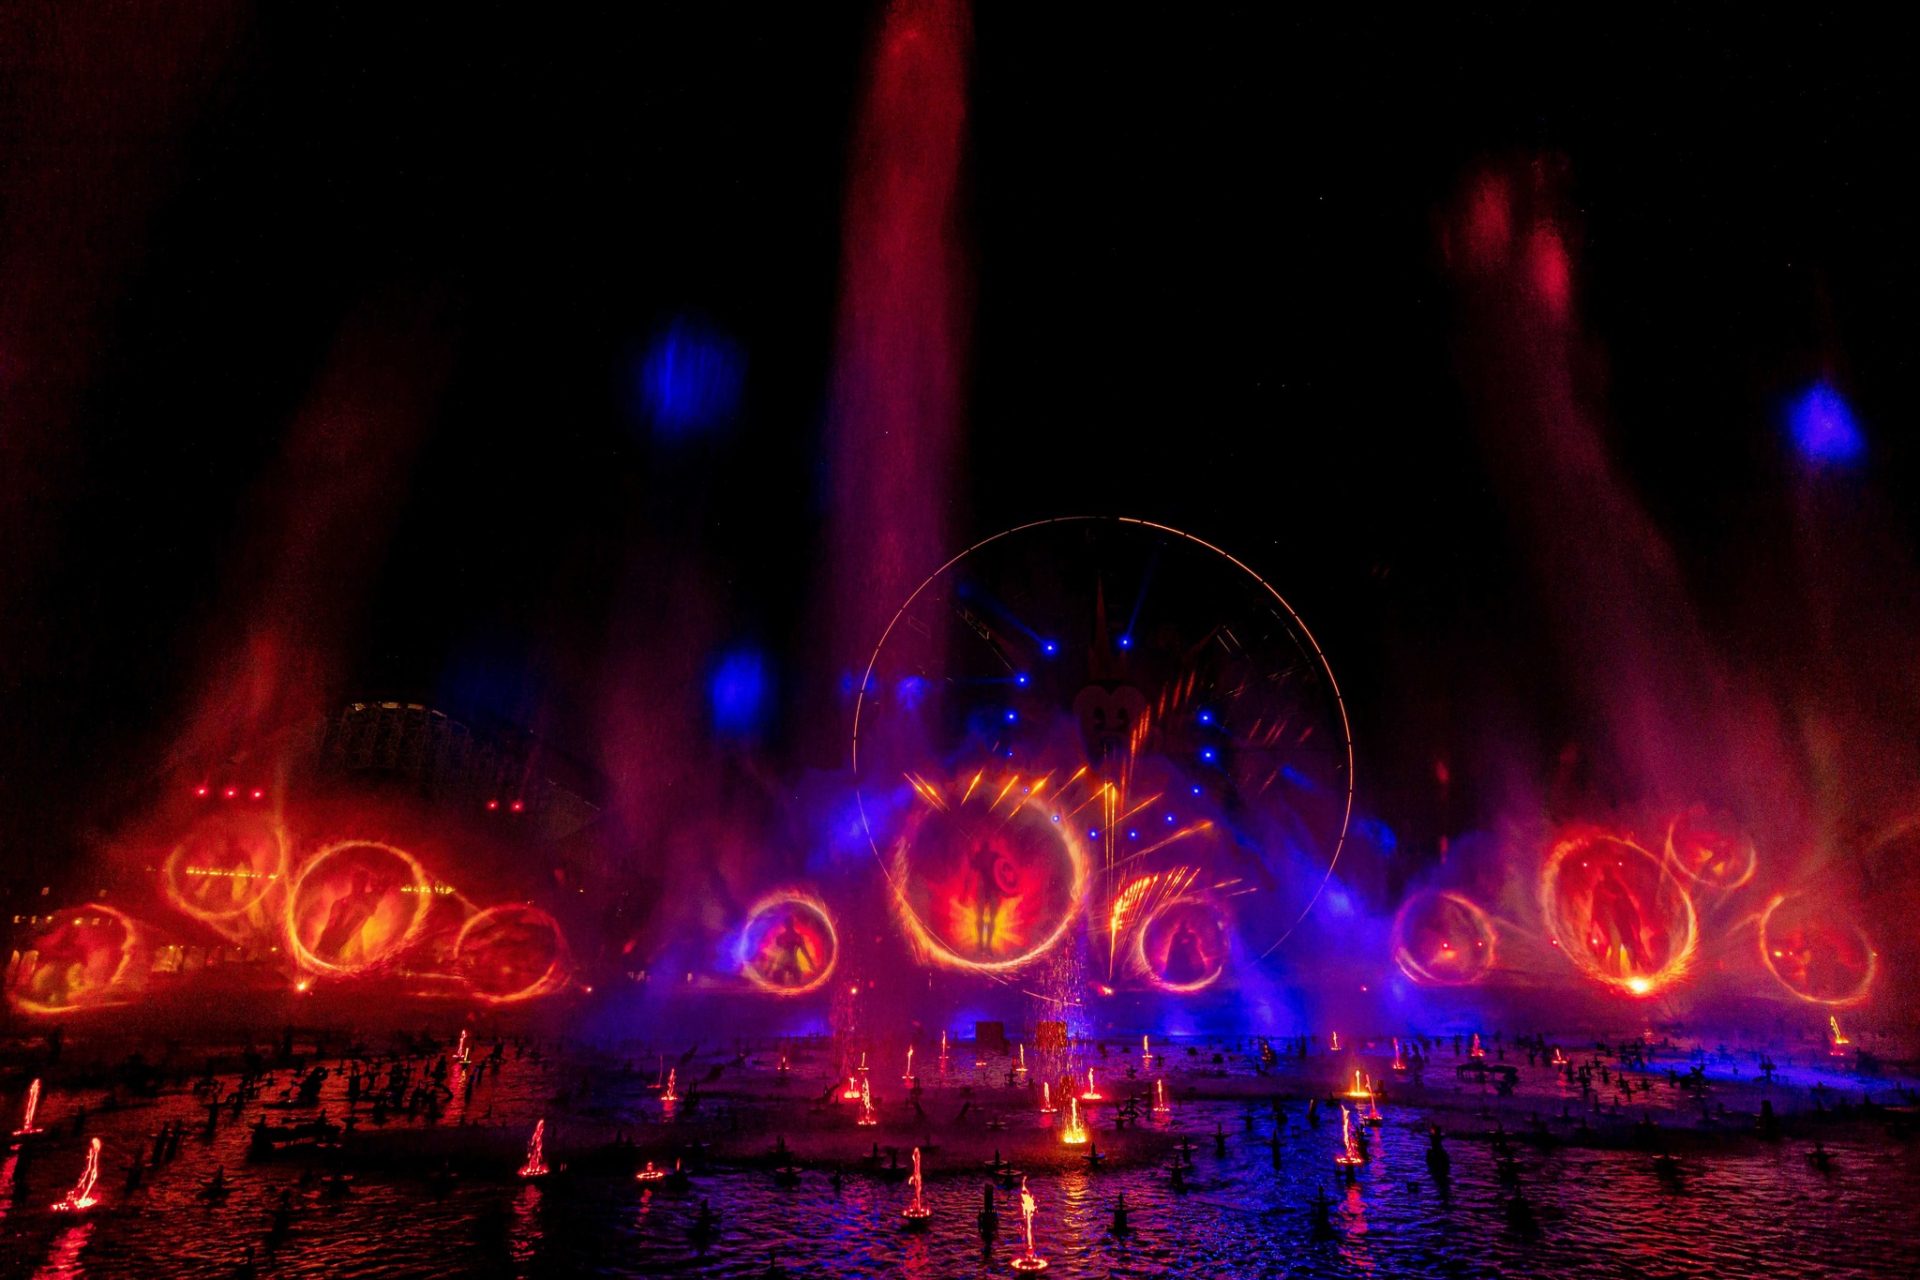 On Jan. 27, 2023, “World of Color – ONE” will debut at Disney California Adventure Park in Anaheim, Calif., as part of the Disney100 anniversary celebration at the Disneyland Resort. This nighttime spectacular by Disney Live Entertainment tells the powerful story of how a single action – like a drop of water – creates a ripple that can grow into a wave of change. Paradise Bay is transformed with a dazzling array of fountains, lighting, lasers, fog and flame effects, harmonized with songs and stori